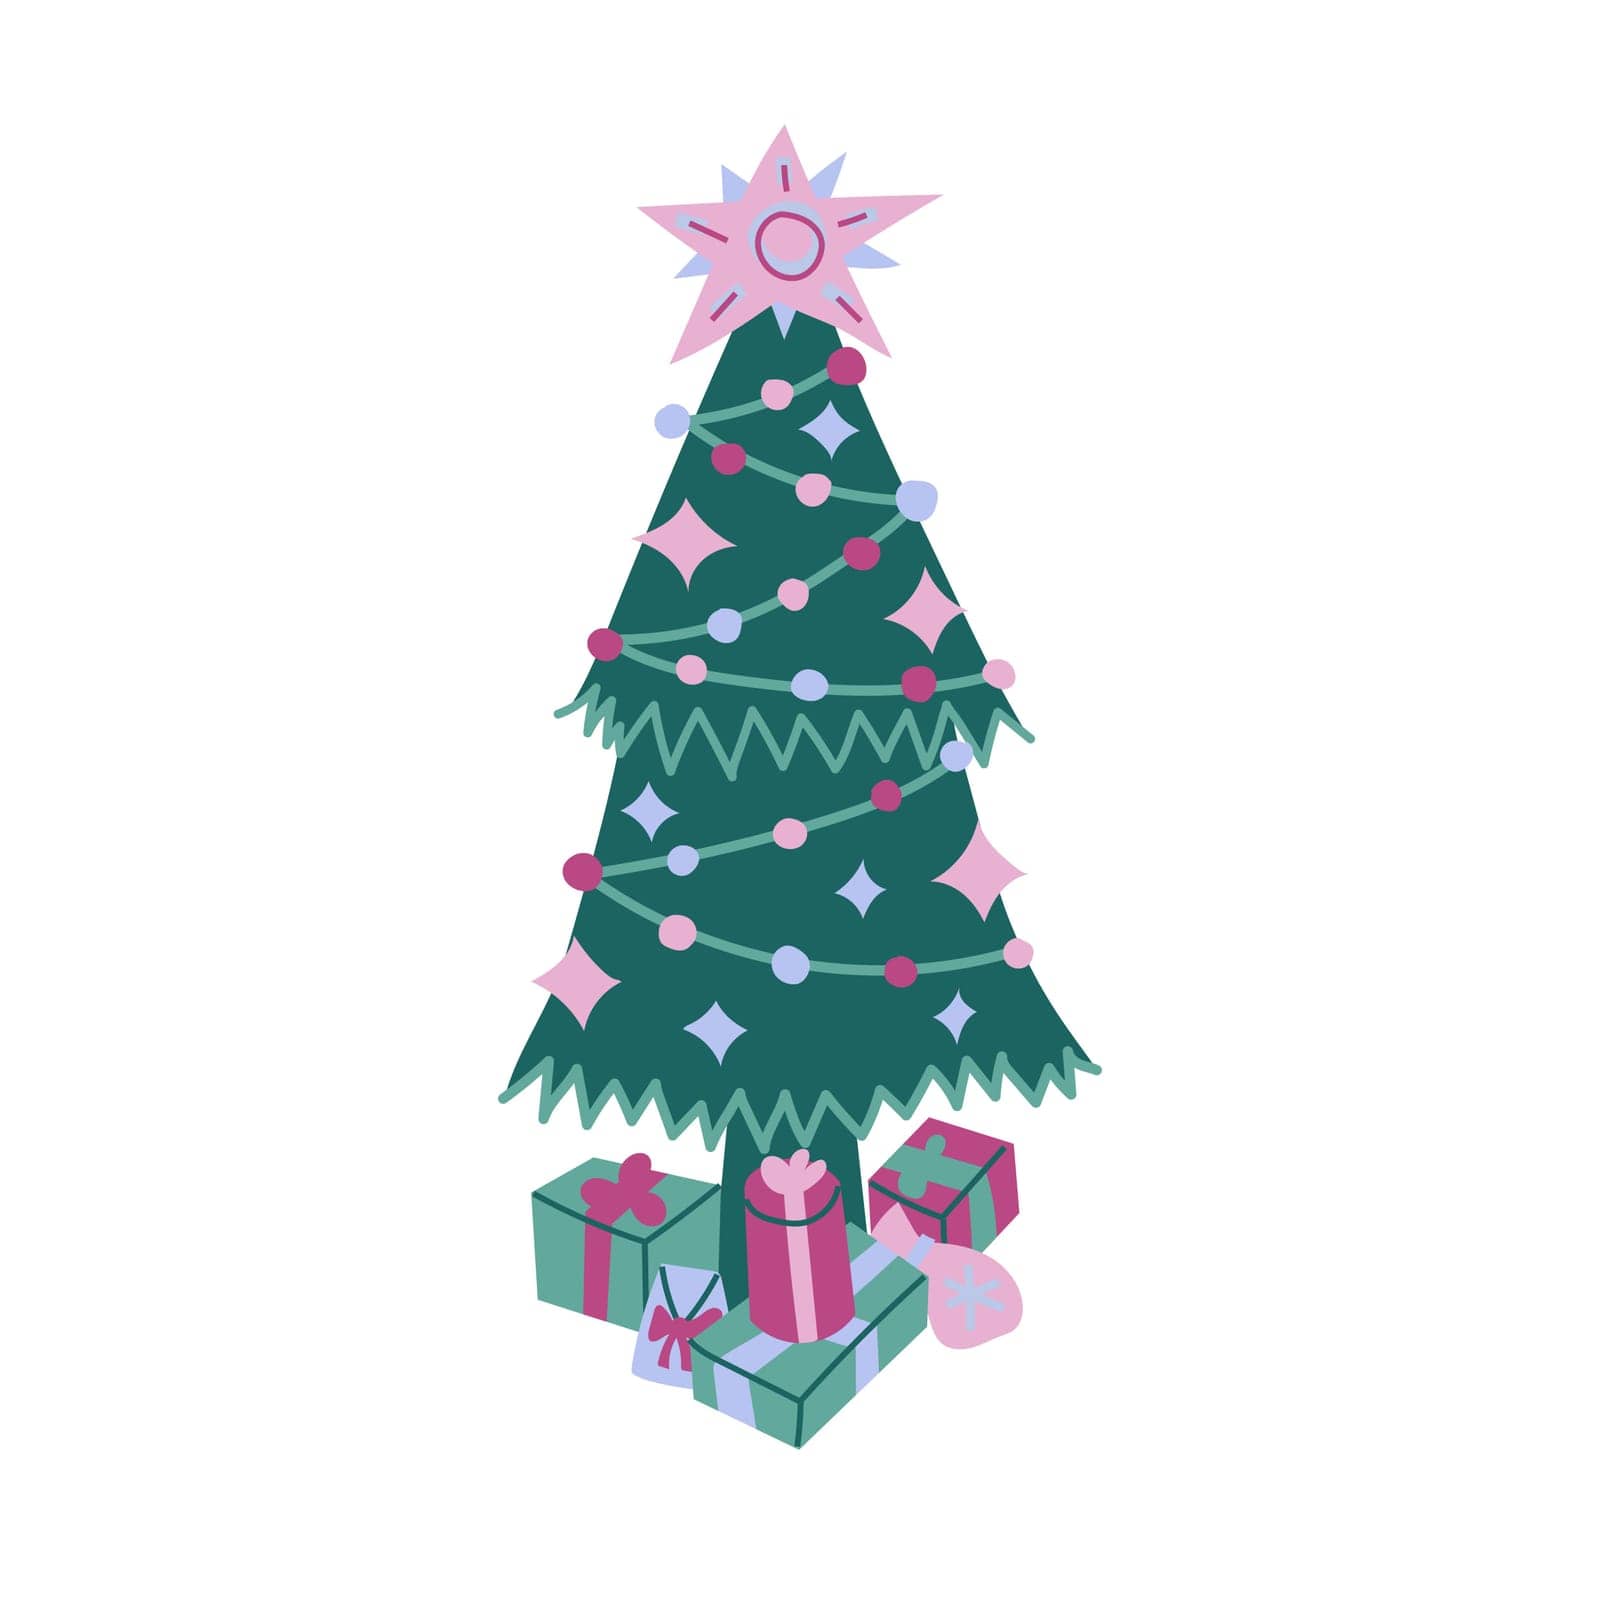 Christmas tree with gifts by chickfishdoodles